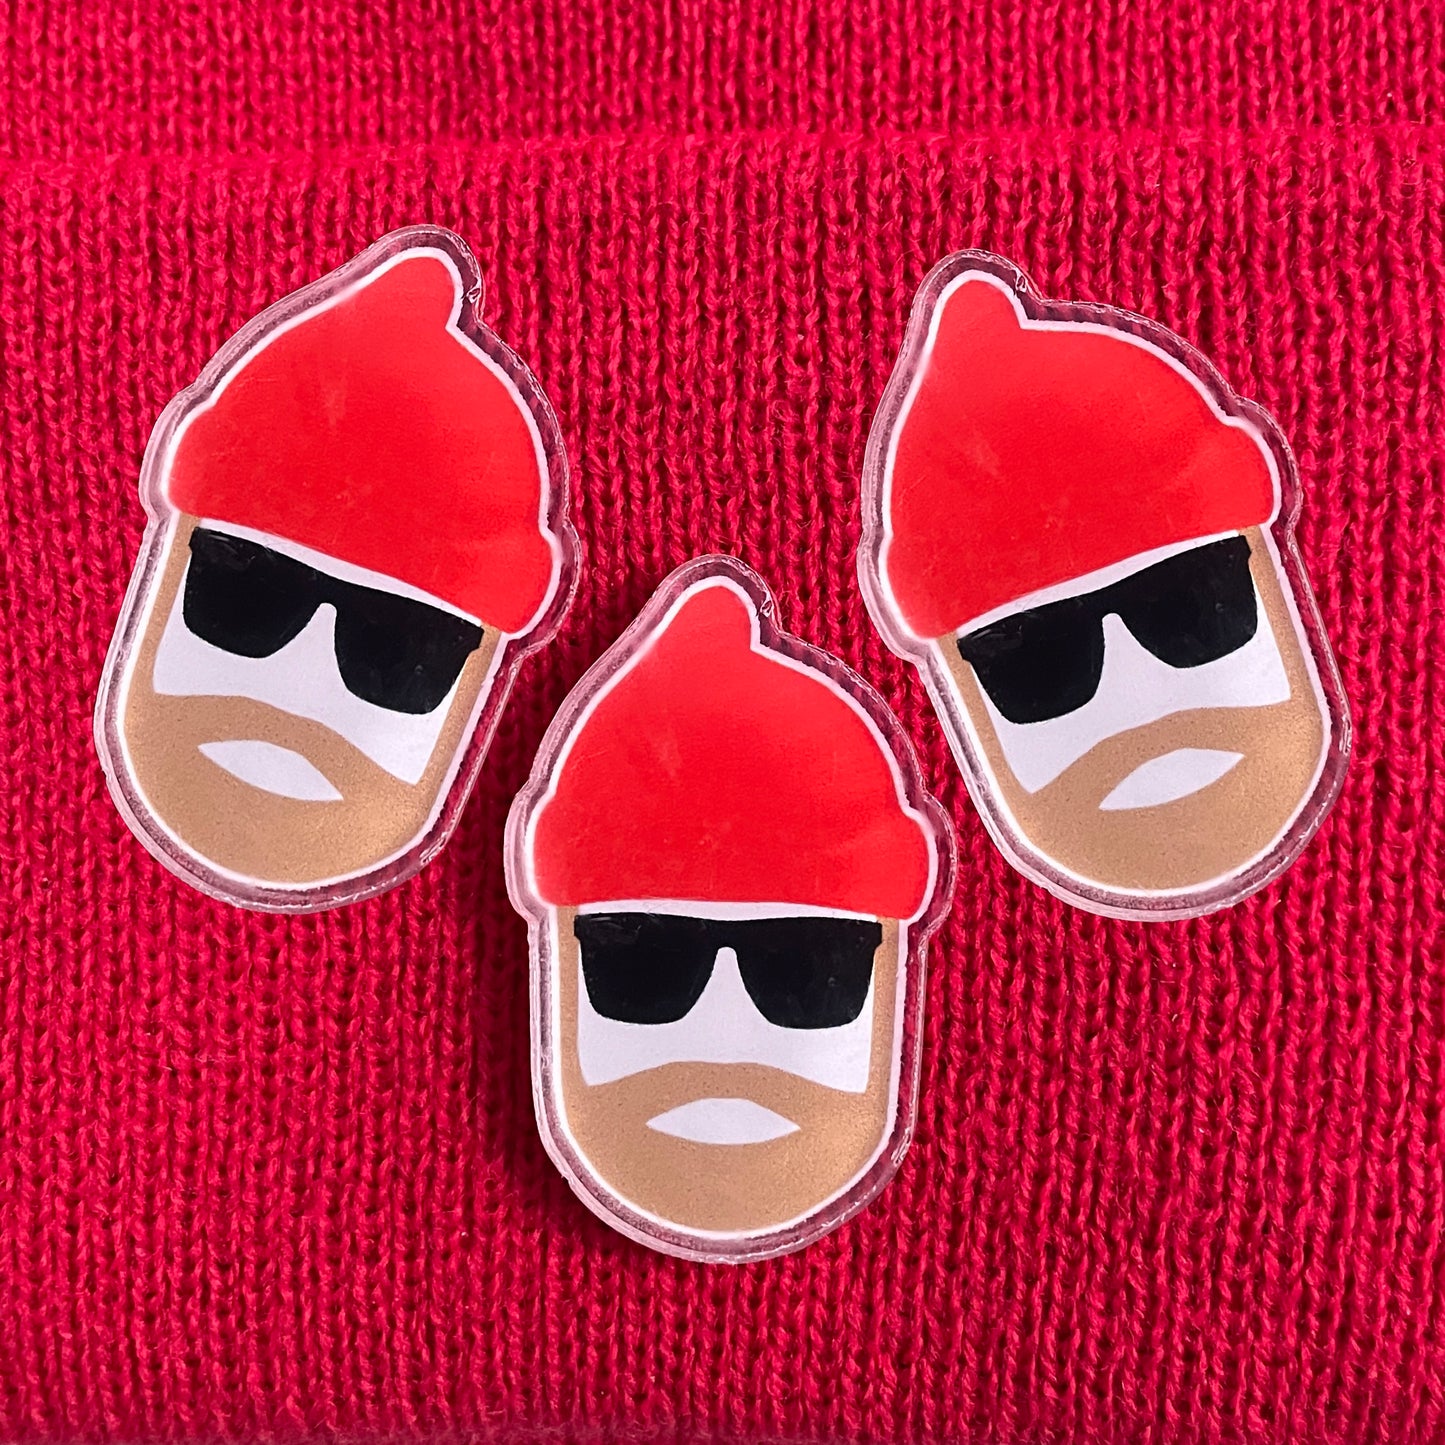 Acrylic Pins - Scuba Diver with Red Hat